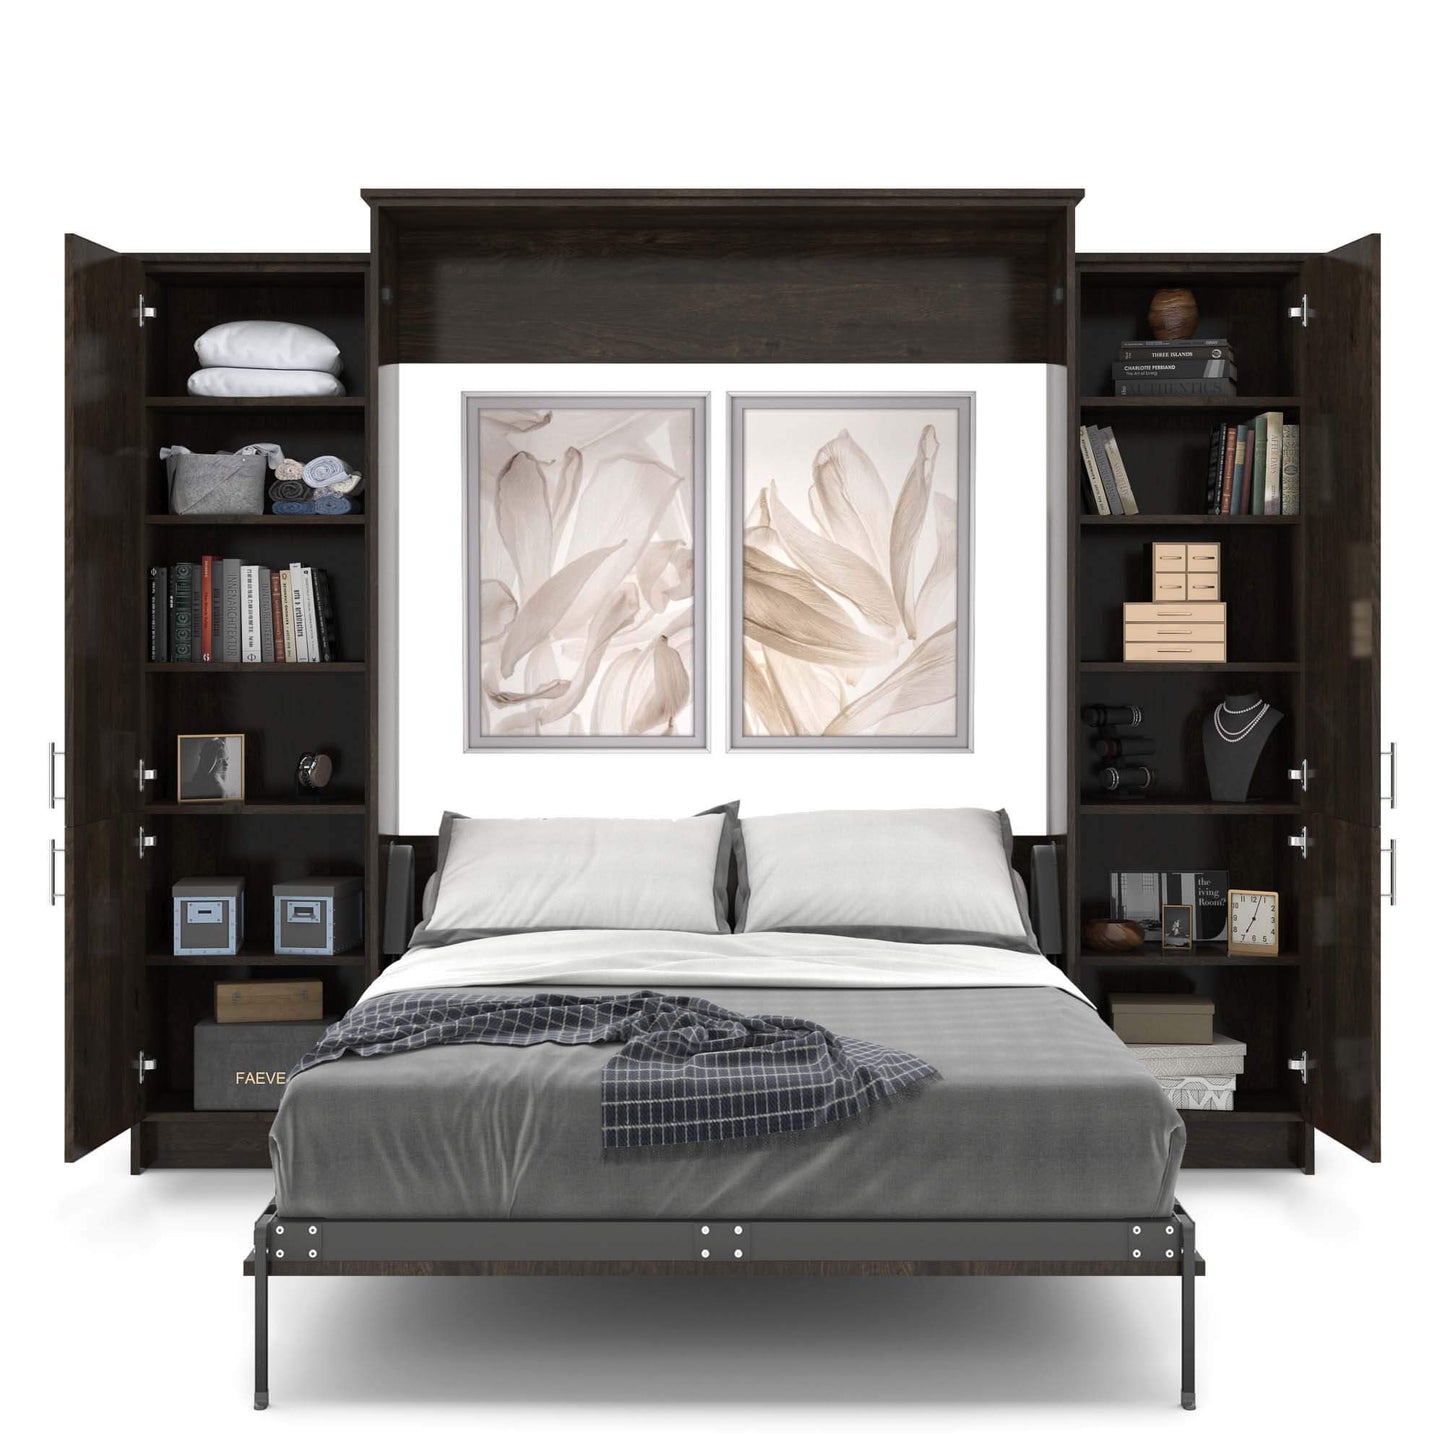 Murphy Bed - Left & Right Side Cabinets